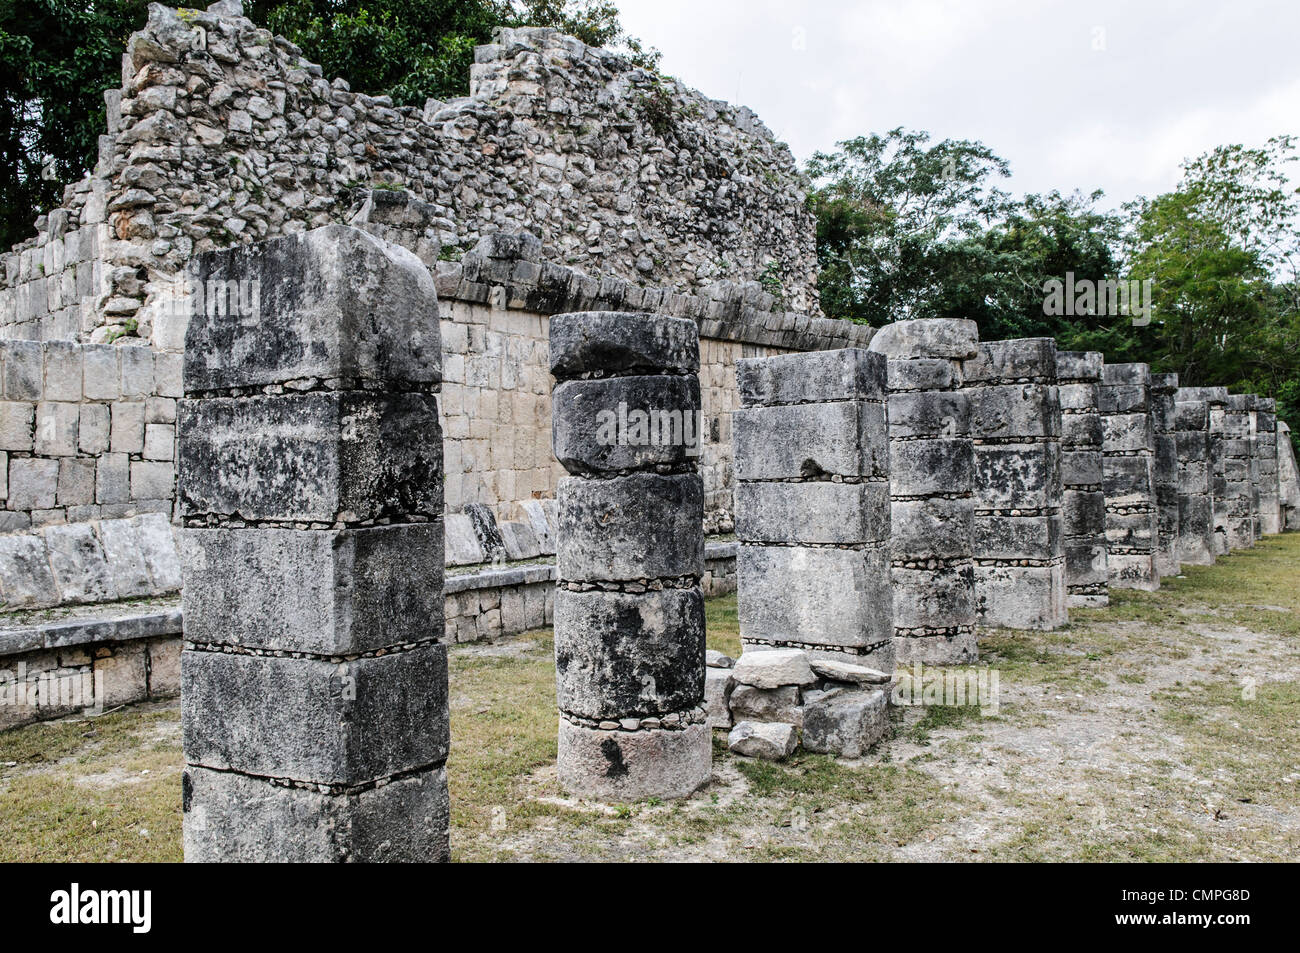 CHICHEN ITZA, Mexico - Rows and walls of stone ruins in the Plaza of the Thousand Columns at Chichen Itza Mayan ruins archeological zone in the heart of Mexico's Yucatan Peninsula. Stock Photo